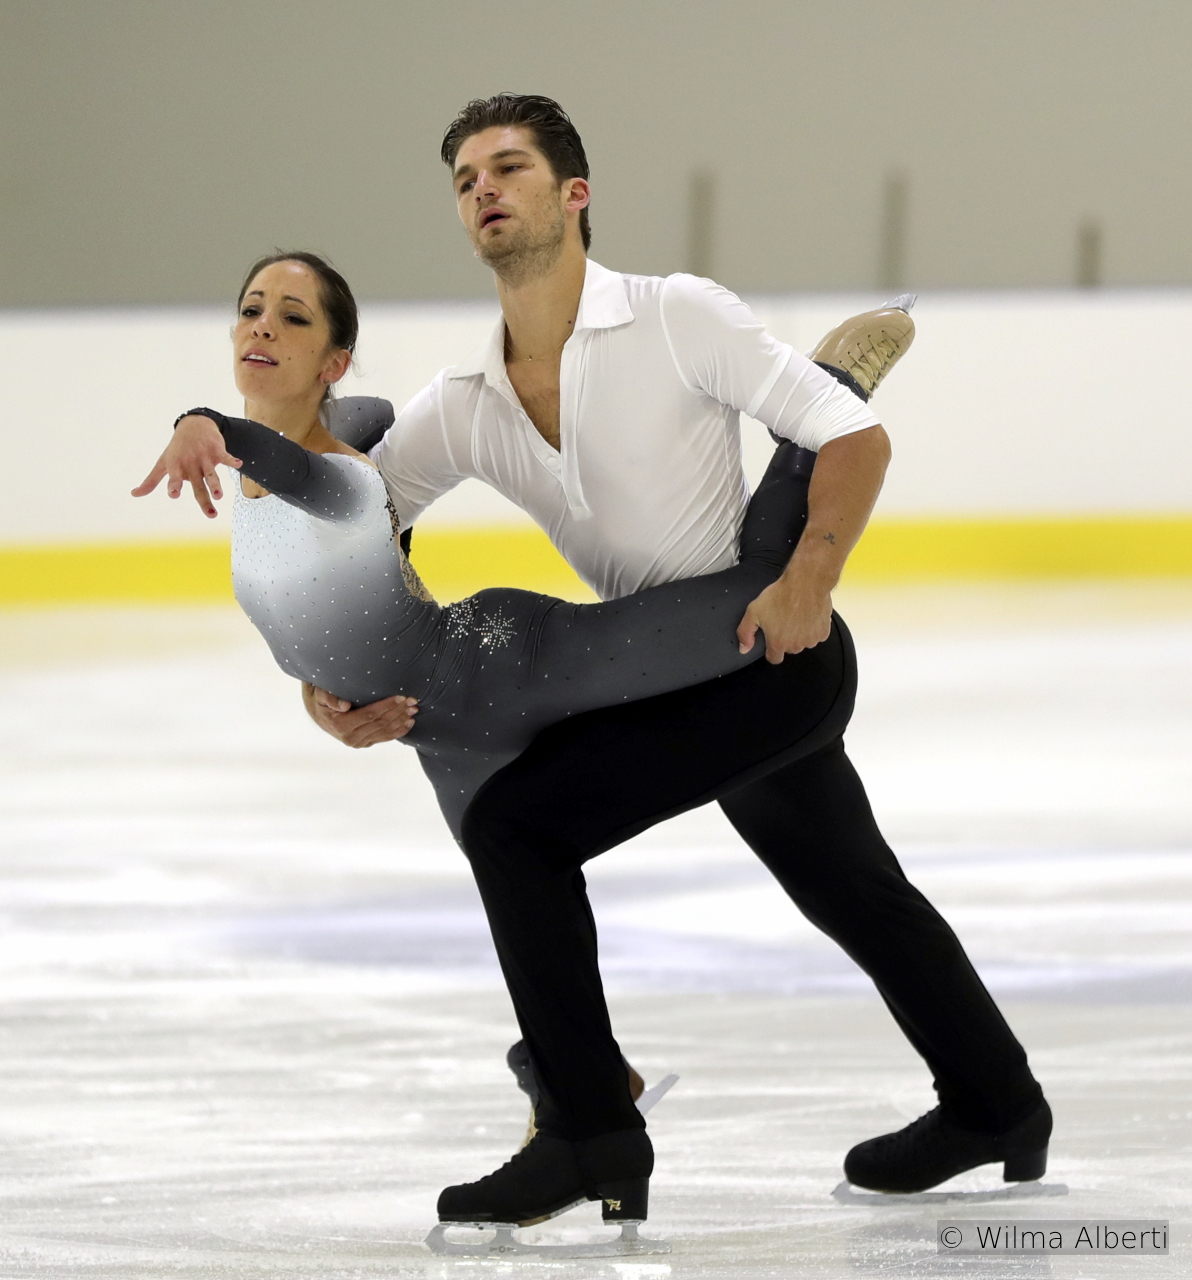 Nicole and Matteo, during their emotional free skate in Bergamo, to „Love Story”, performed by Nana Mouskouri